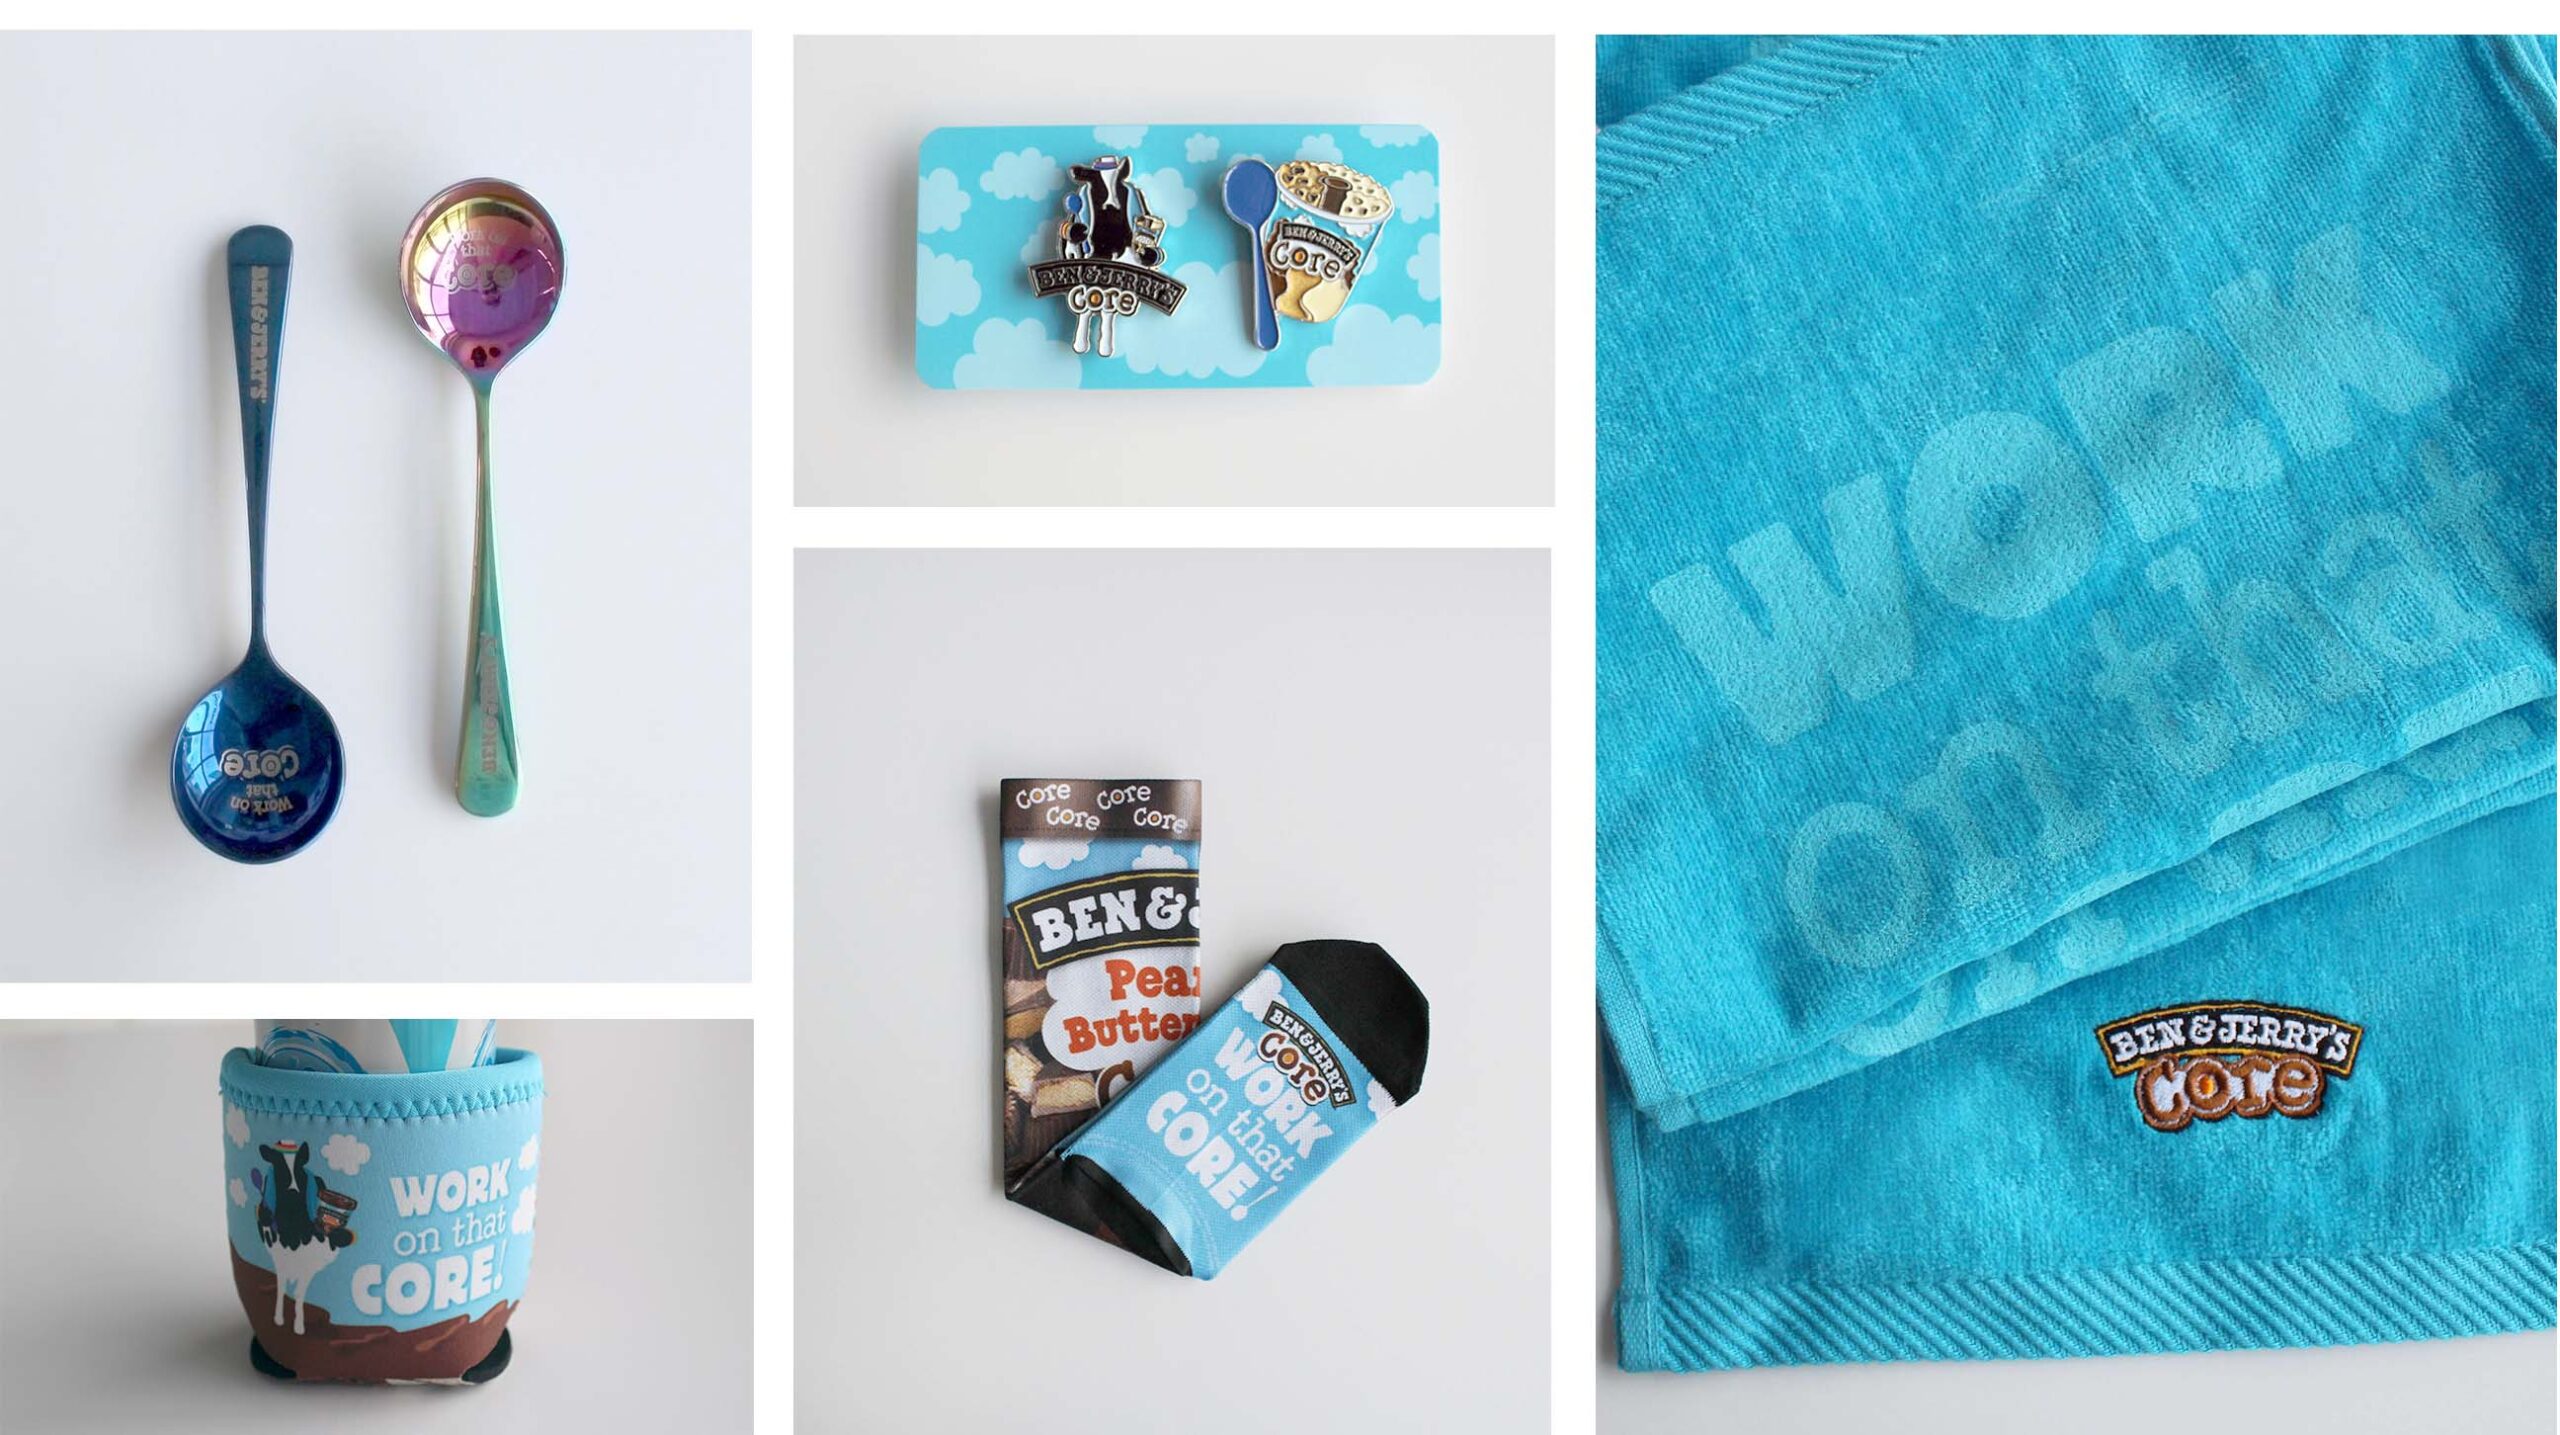 5 images - custom spoons, enamel pins, ice cream koozie, dye-sublimated sock , and imprinted workout towels all with the Ben and Jerry's "work your core" branding.